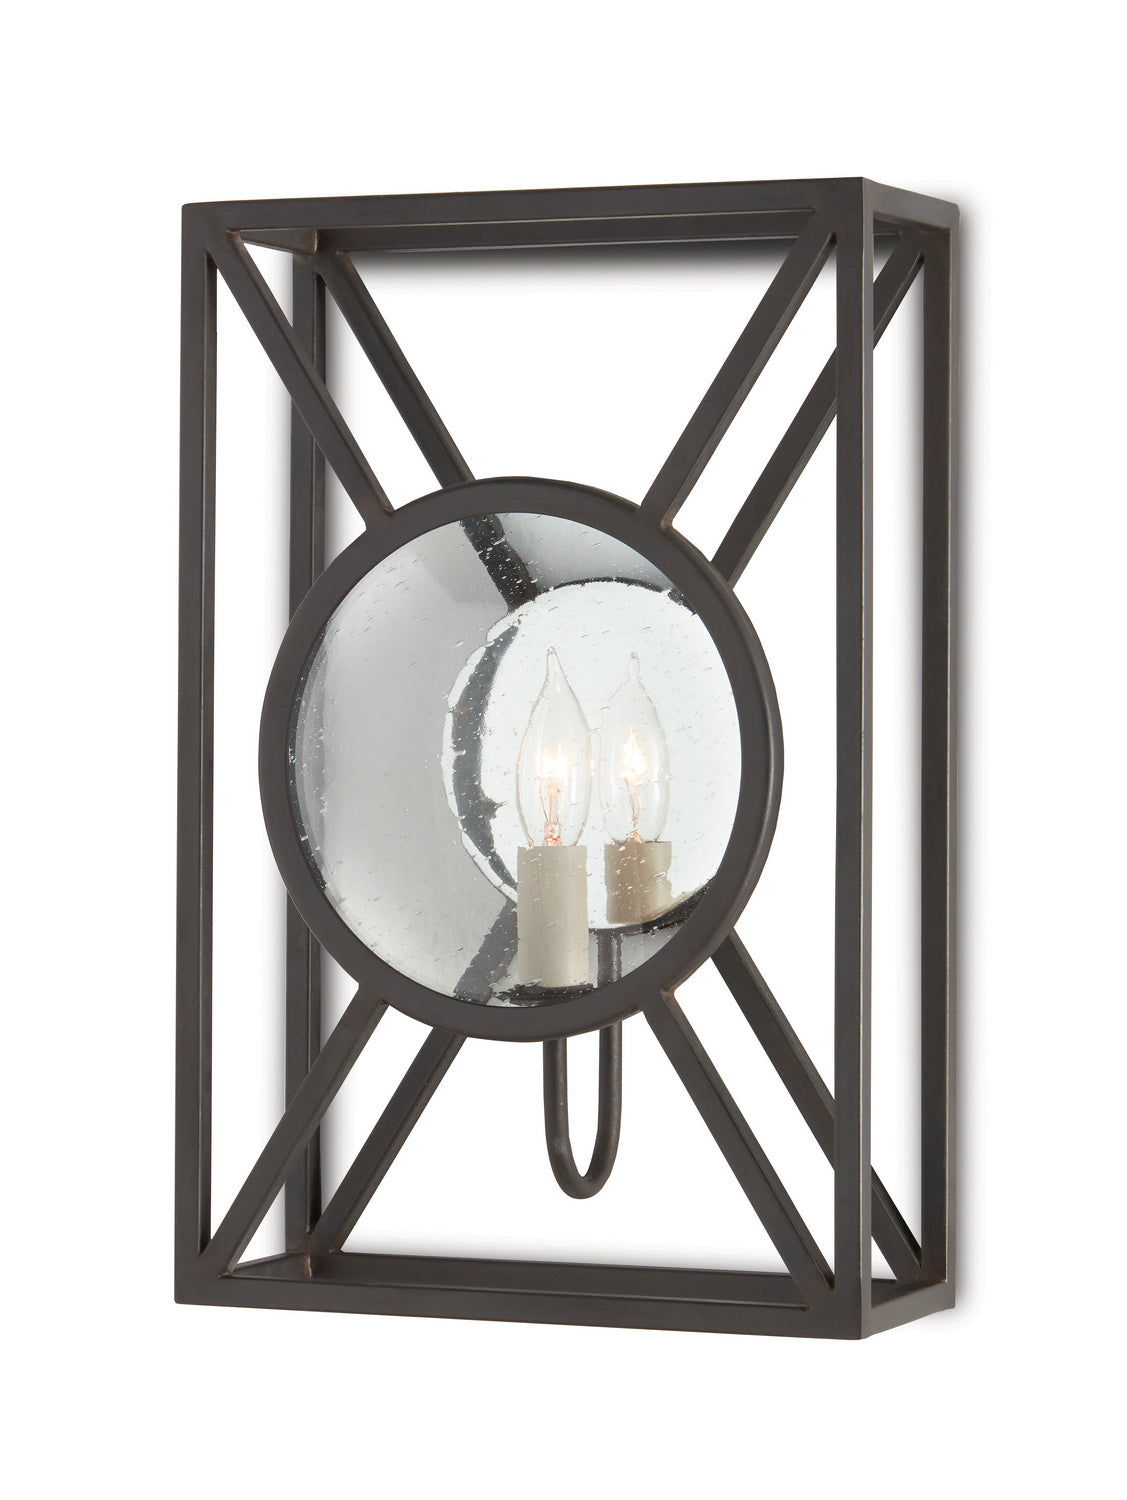 One Light Wall Sconce from the Lillian August collection in Old Iron finish